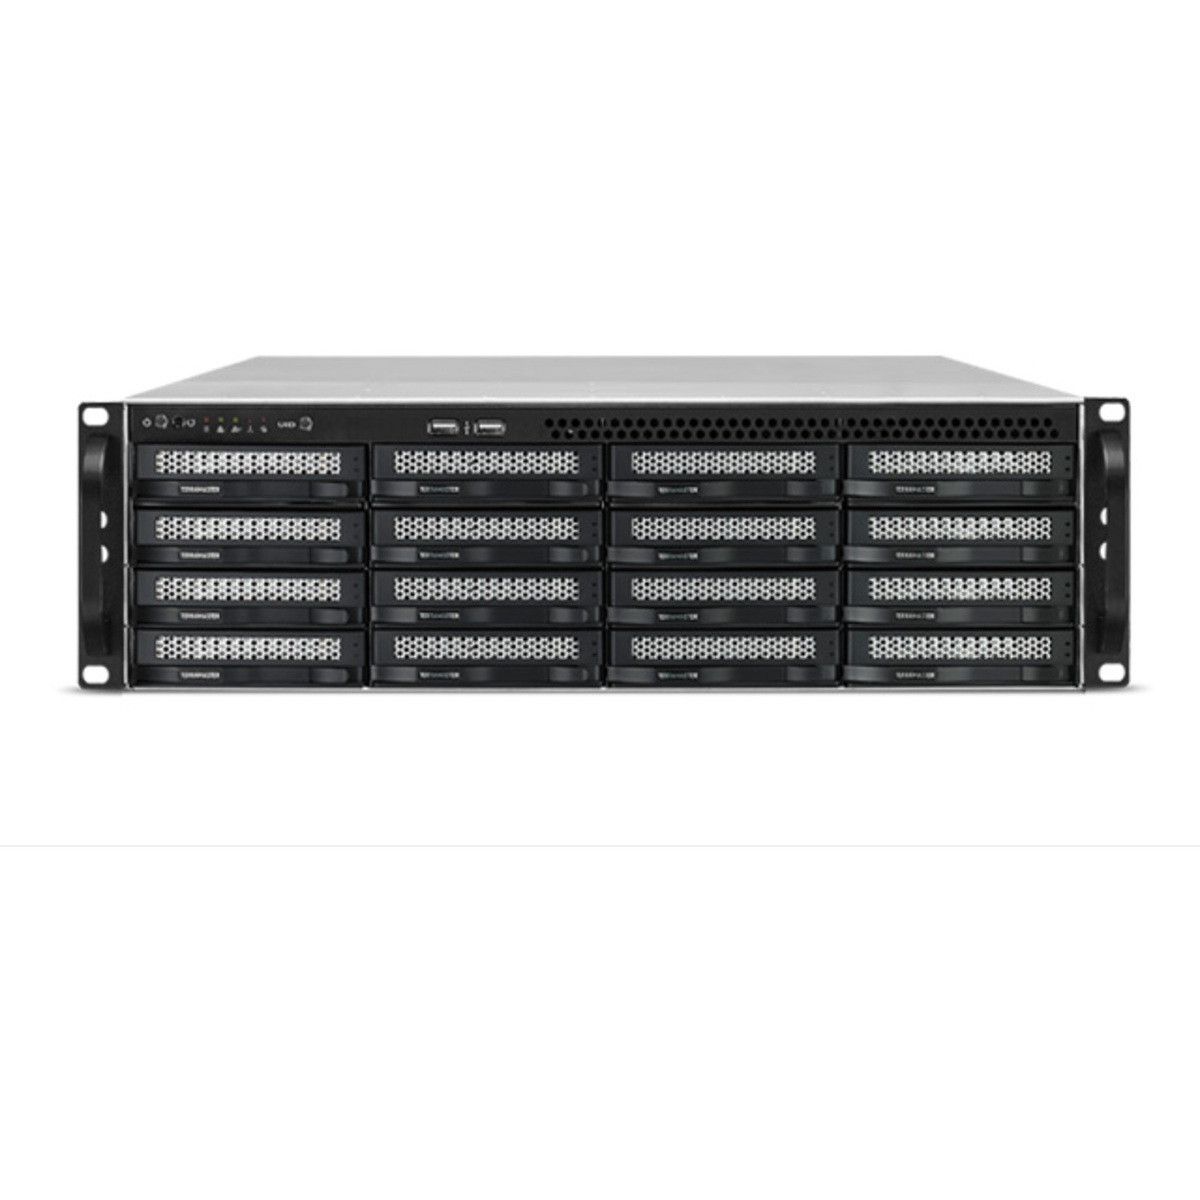 TerraMaster U16-722-2224 312tb 16-Bay RackMount Large Business / Enterprise NAS - Network Attached Storage Device 13x24tb Seagate IronWolf Pro ST24000NT002 3.5 7200rpm SATA 6Gb/s HDD NAS Class Drives Installed - Burn-In Tested U16-722-2224